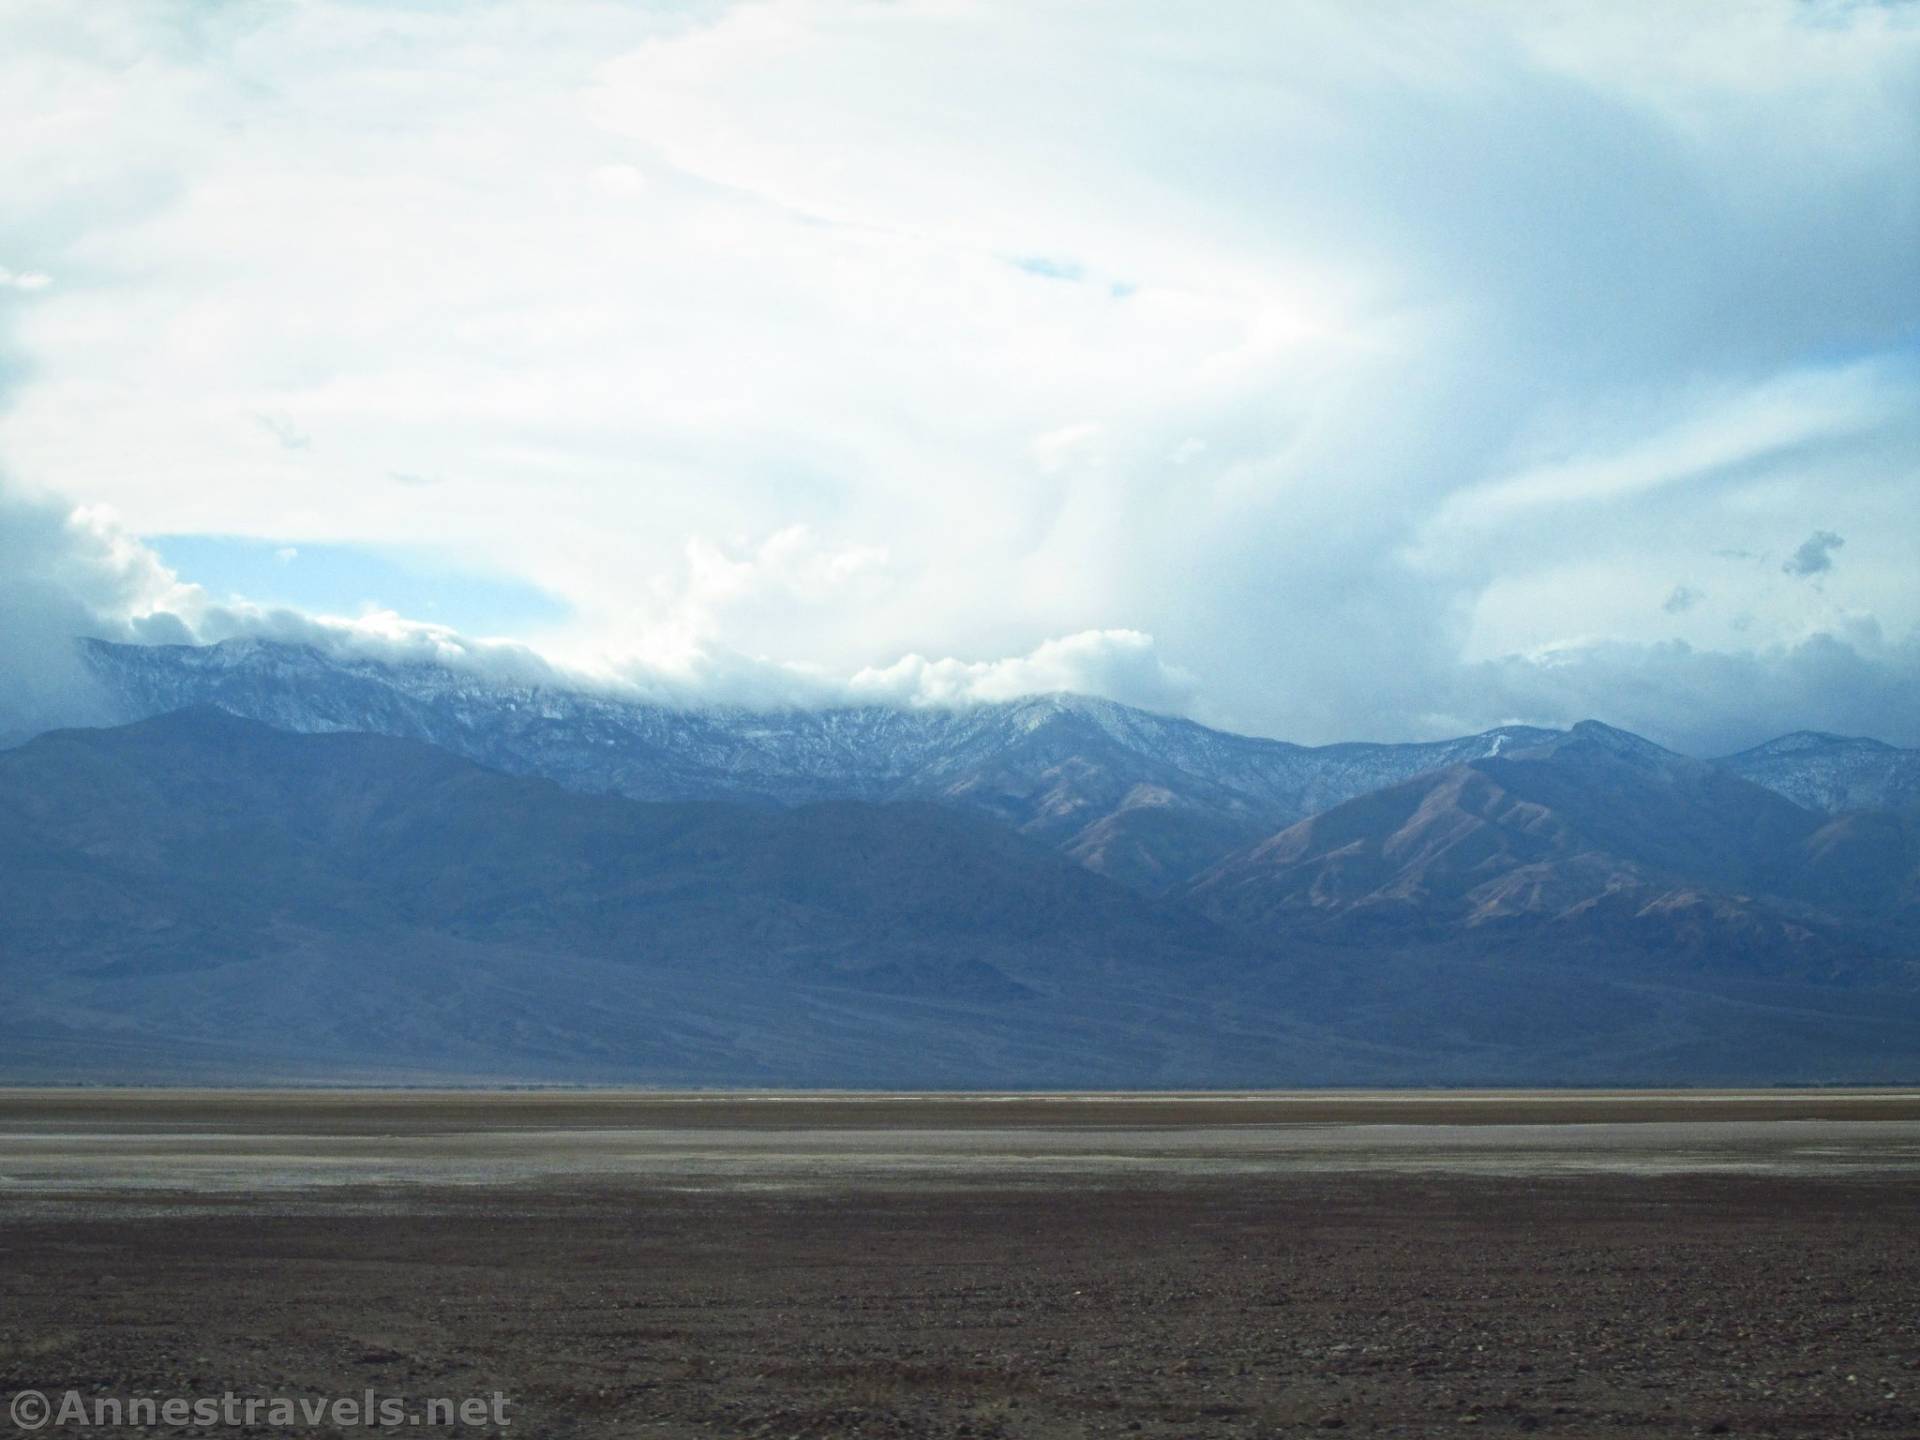 The Panamint Mountains from the Badwater Road, Death Valley National Park, California